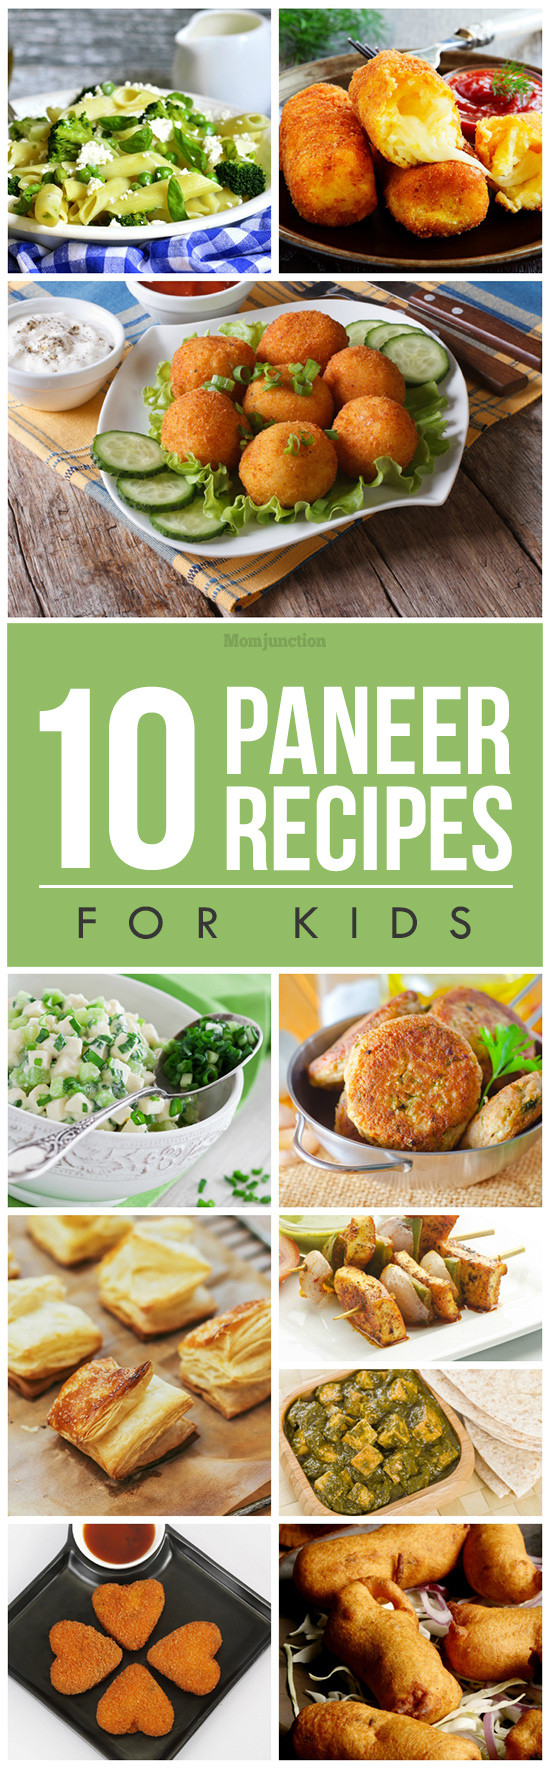 Paneer Recipes For Kids
 10 Simple Paneer Recipes For Kids To Try